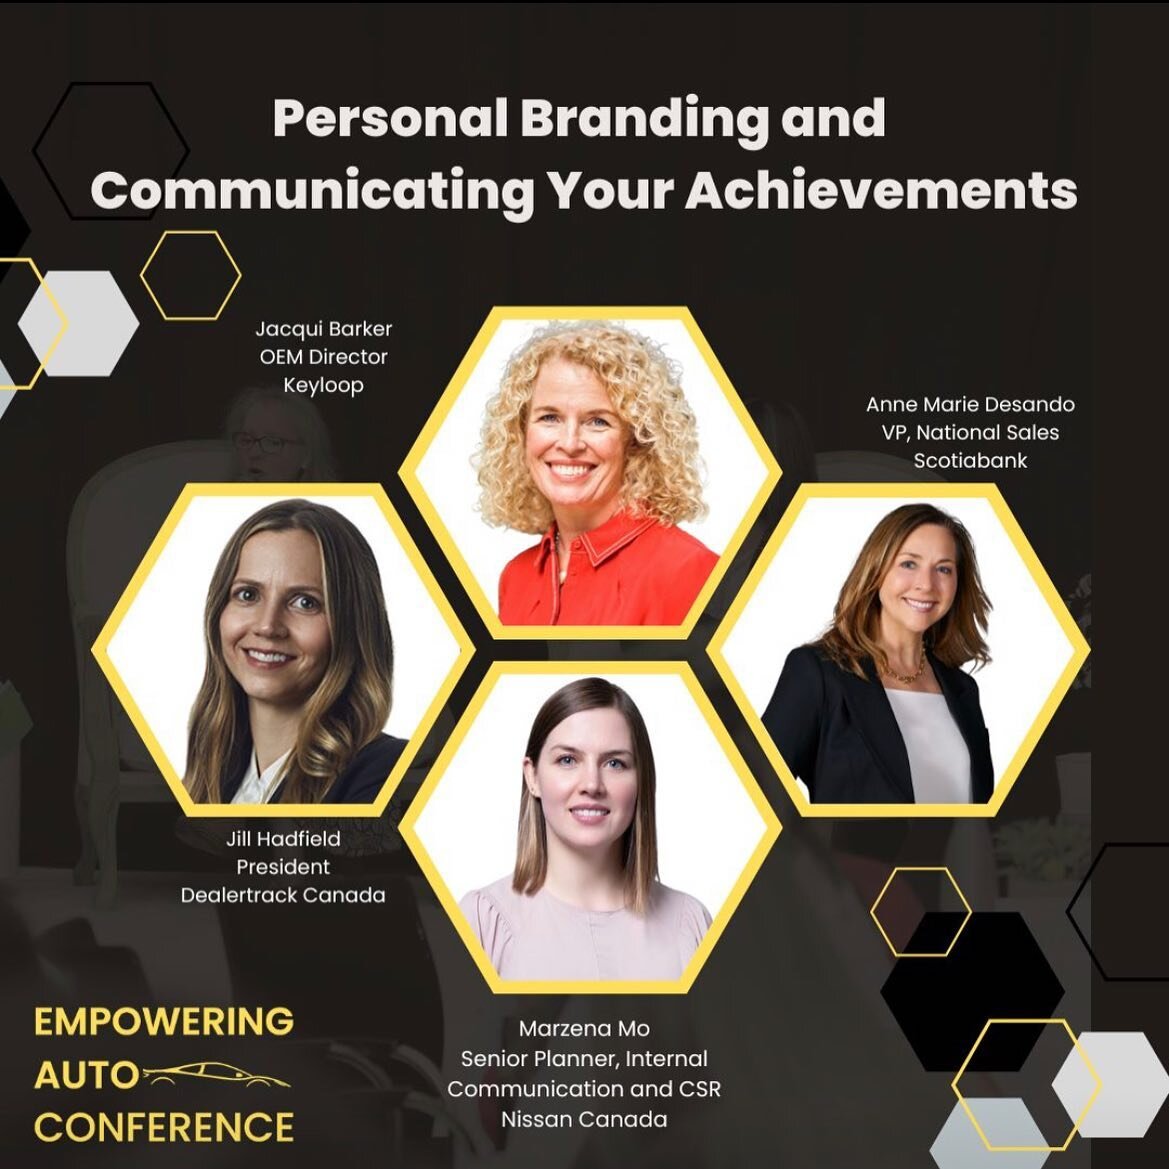 Are you ready to take your personal brand to the next level? Join us for an enlightening panel discussion on the art of personal branding, where industry experts will share their insights and strategies to help you stand out in a crowd, as well as ho